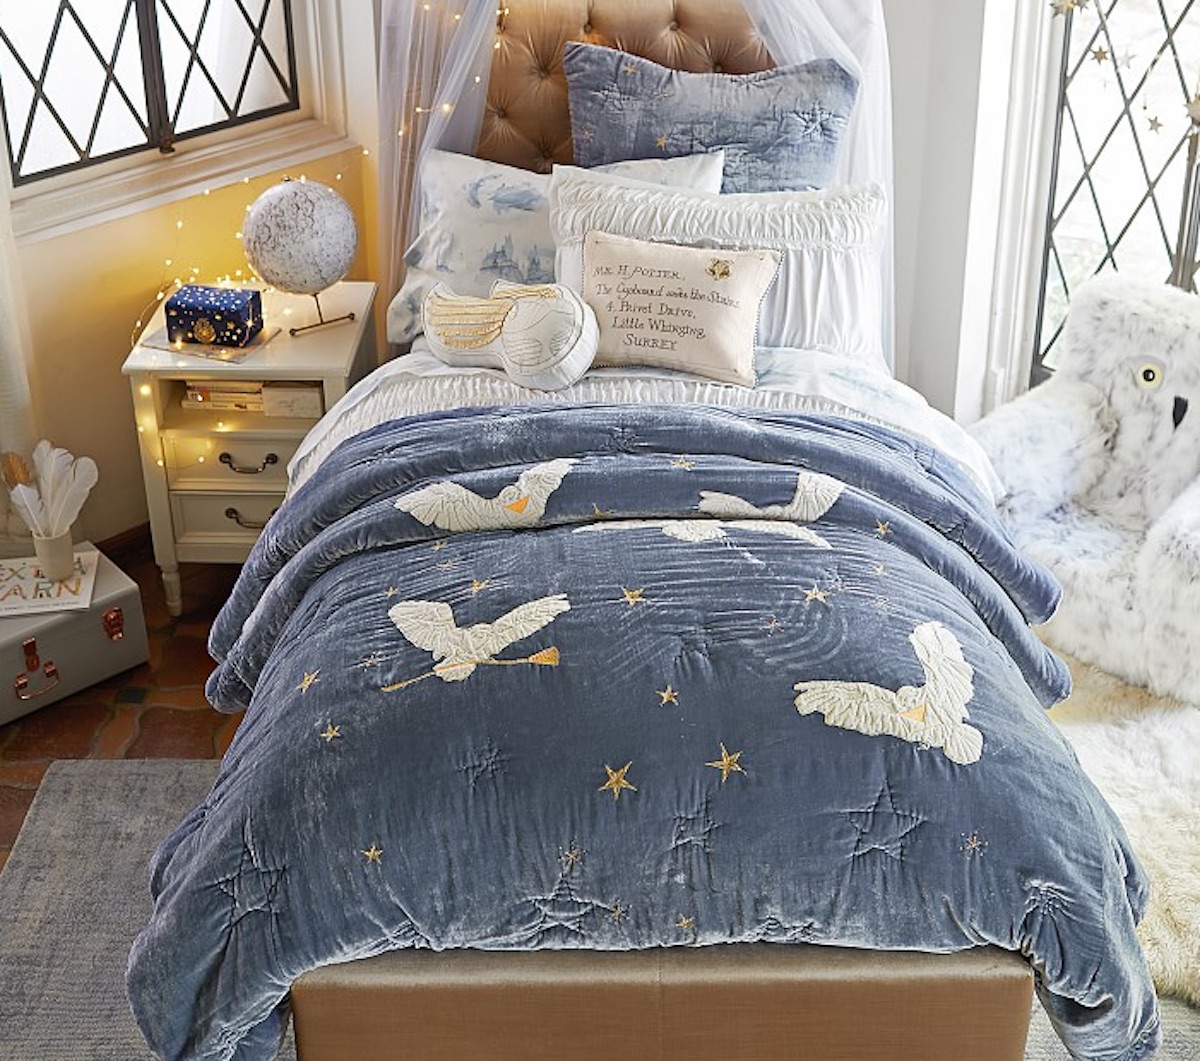 Pottery Barn Launches Harry Potter Collections for Kids, Teens & Home